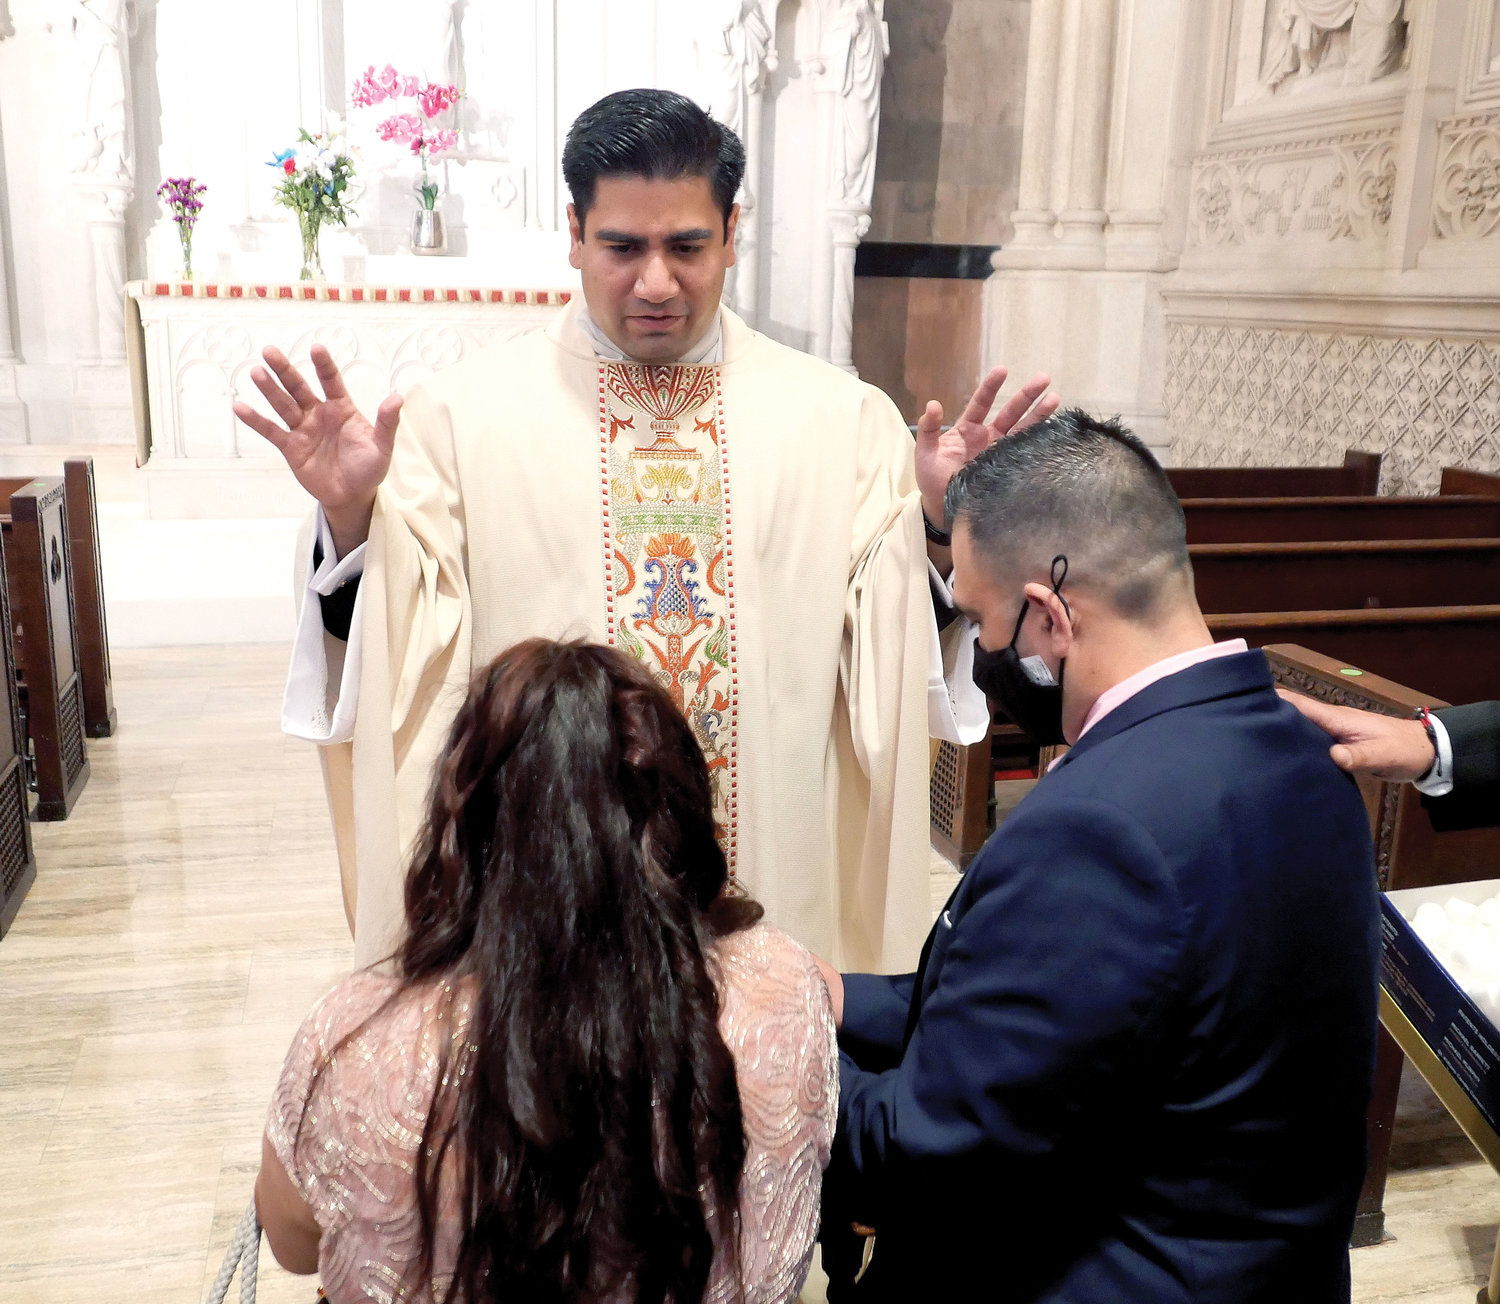 Father Silva offers first blessings near the cathedral’s Our Lady of Guadalupe altar after the liturgy.